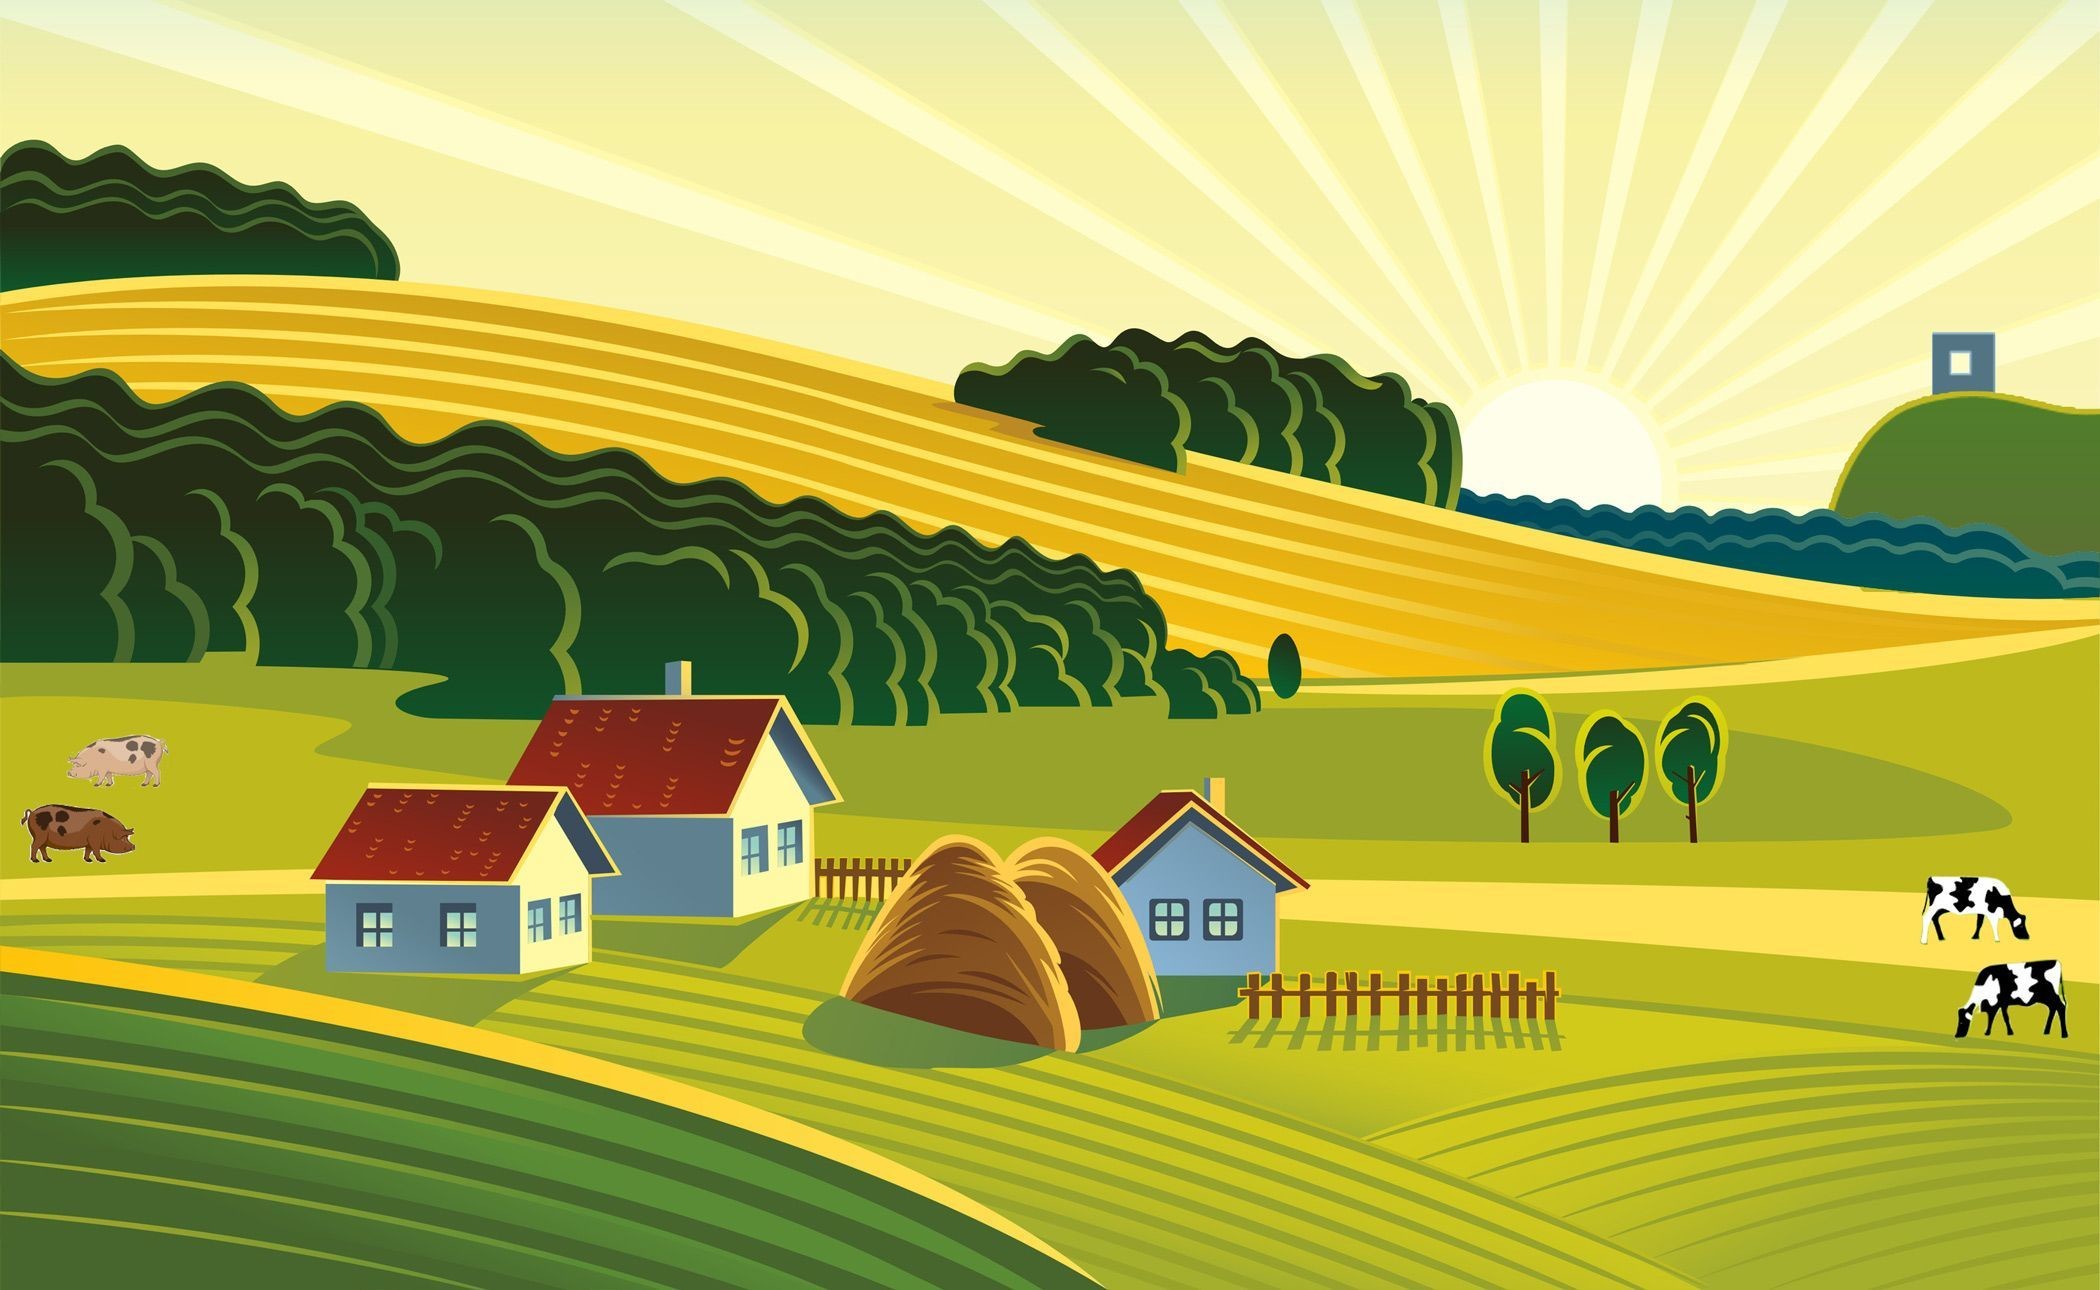 Farm pictures images x. Agriculture clipart agriculture background